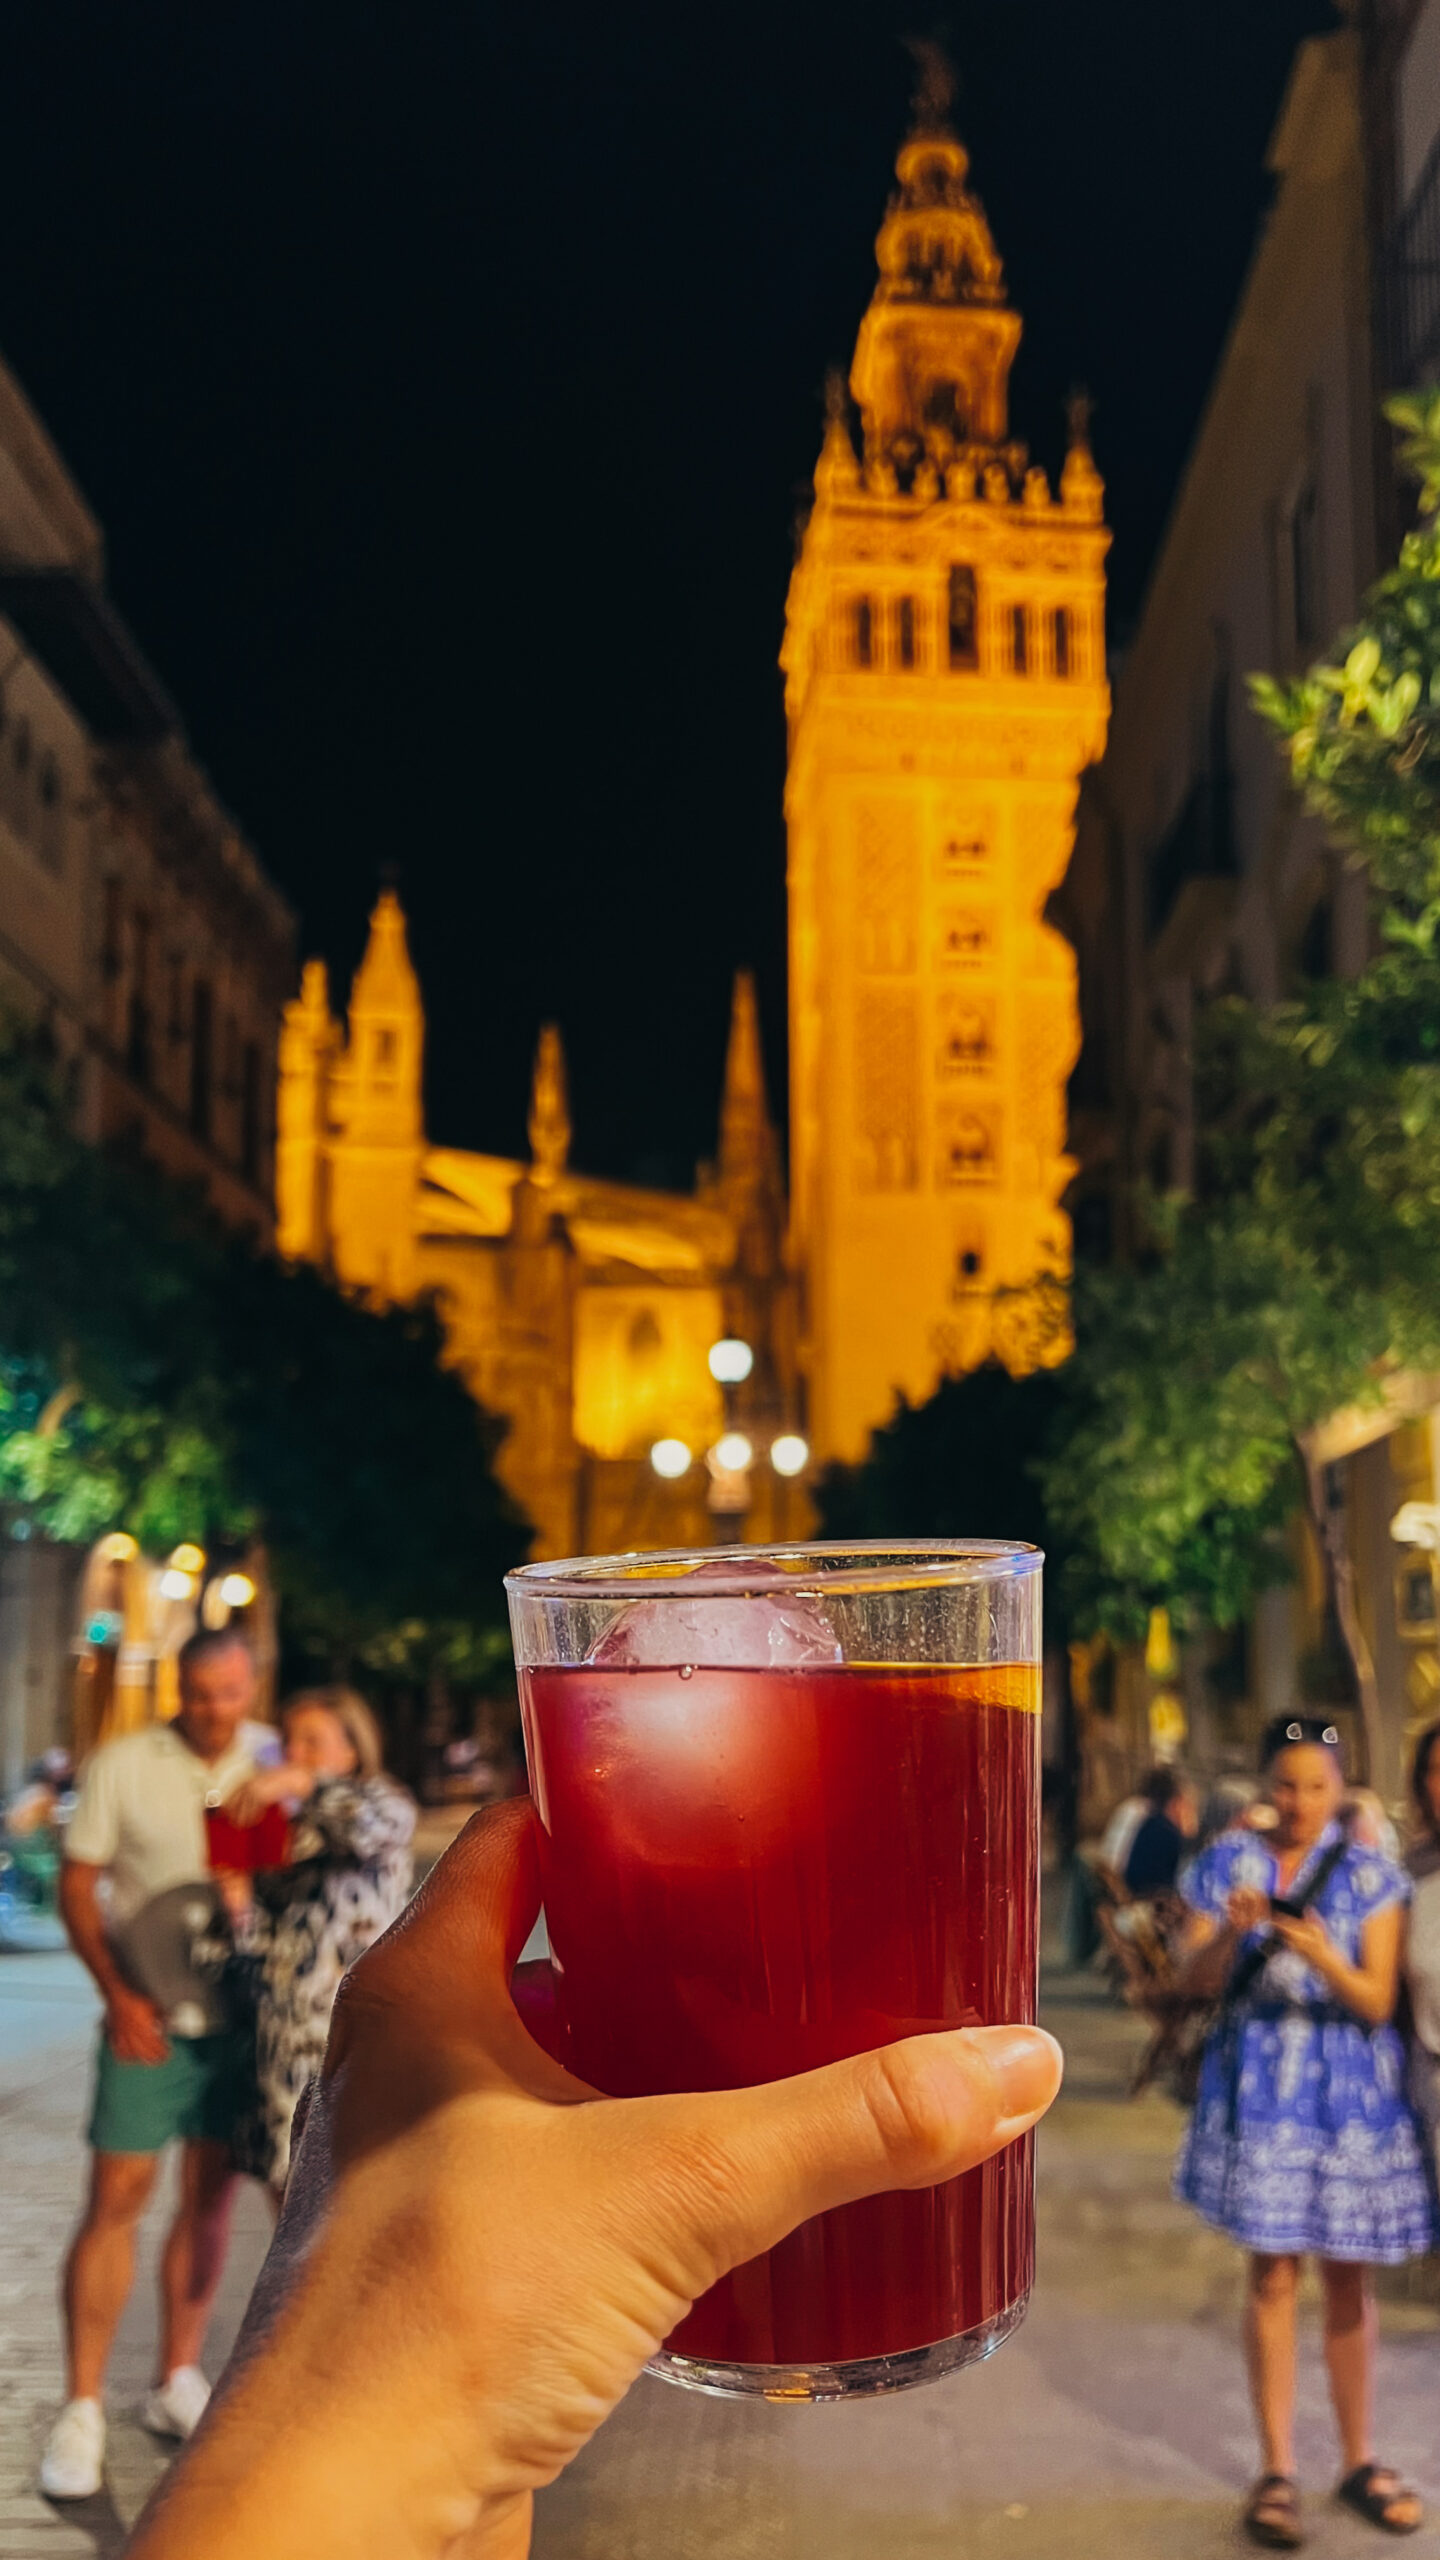 Seville, tinto de verano and cathedral, by Dancing the Earth